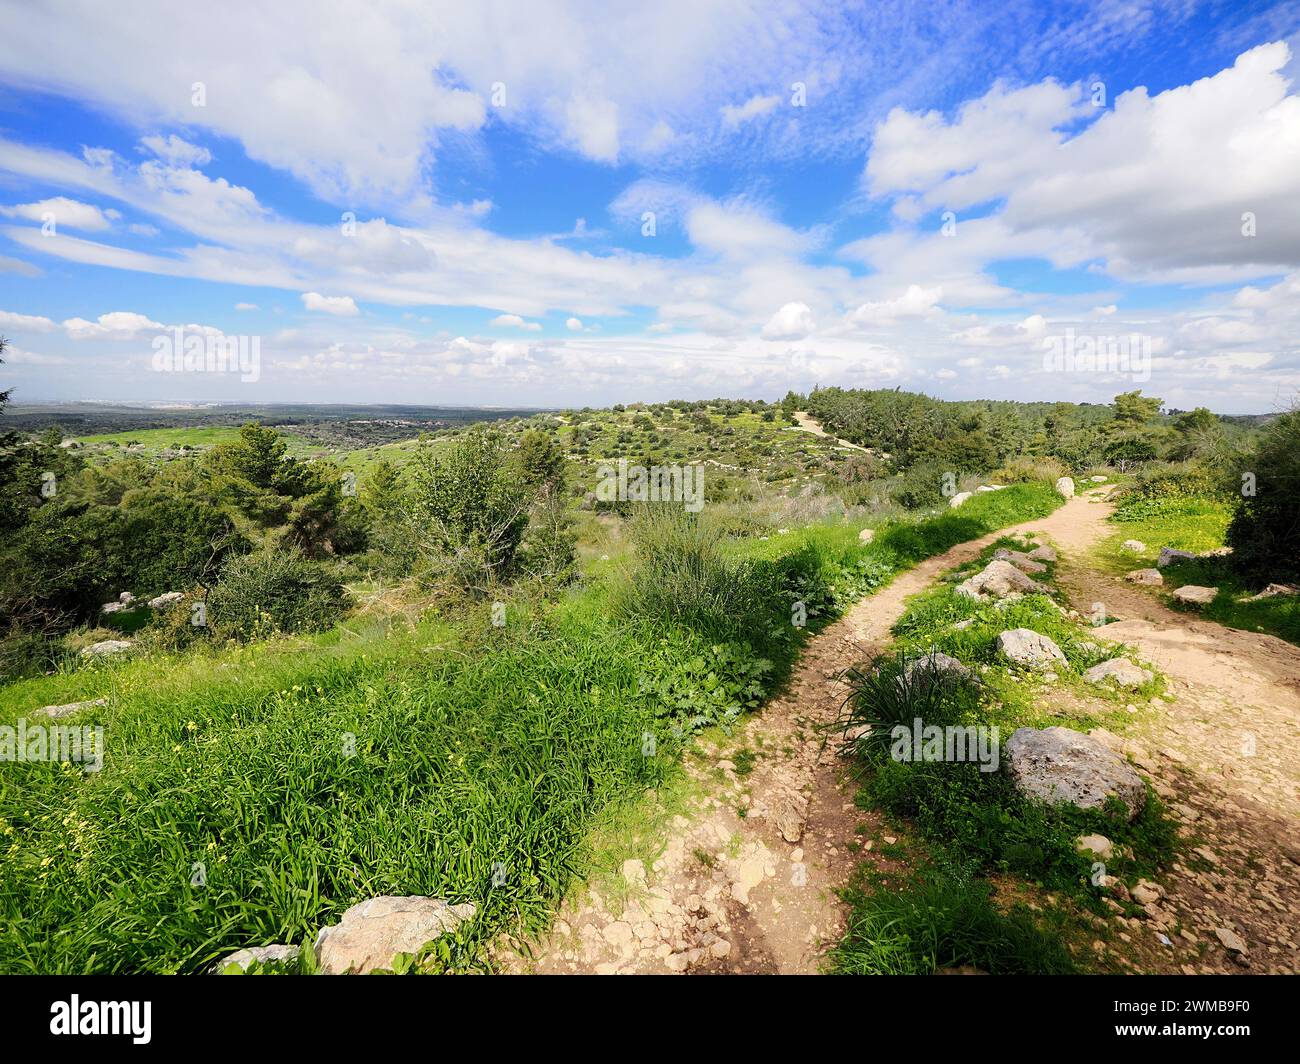 All nature comes to life and wakes up in Israel after the winter rains. Stock Photo